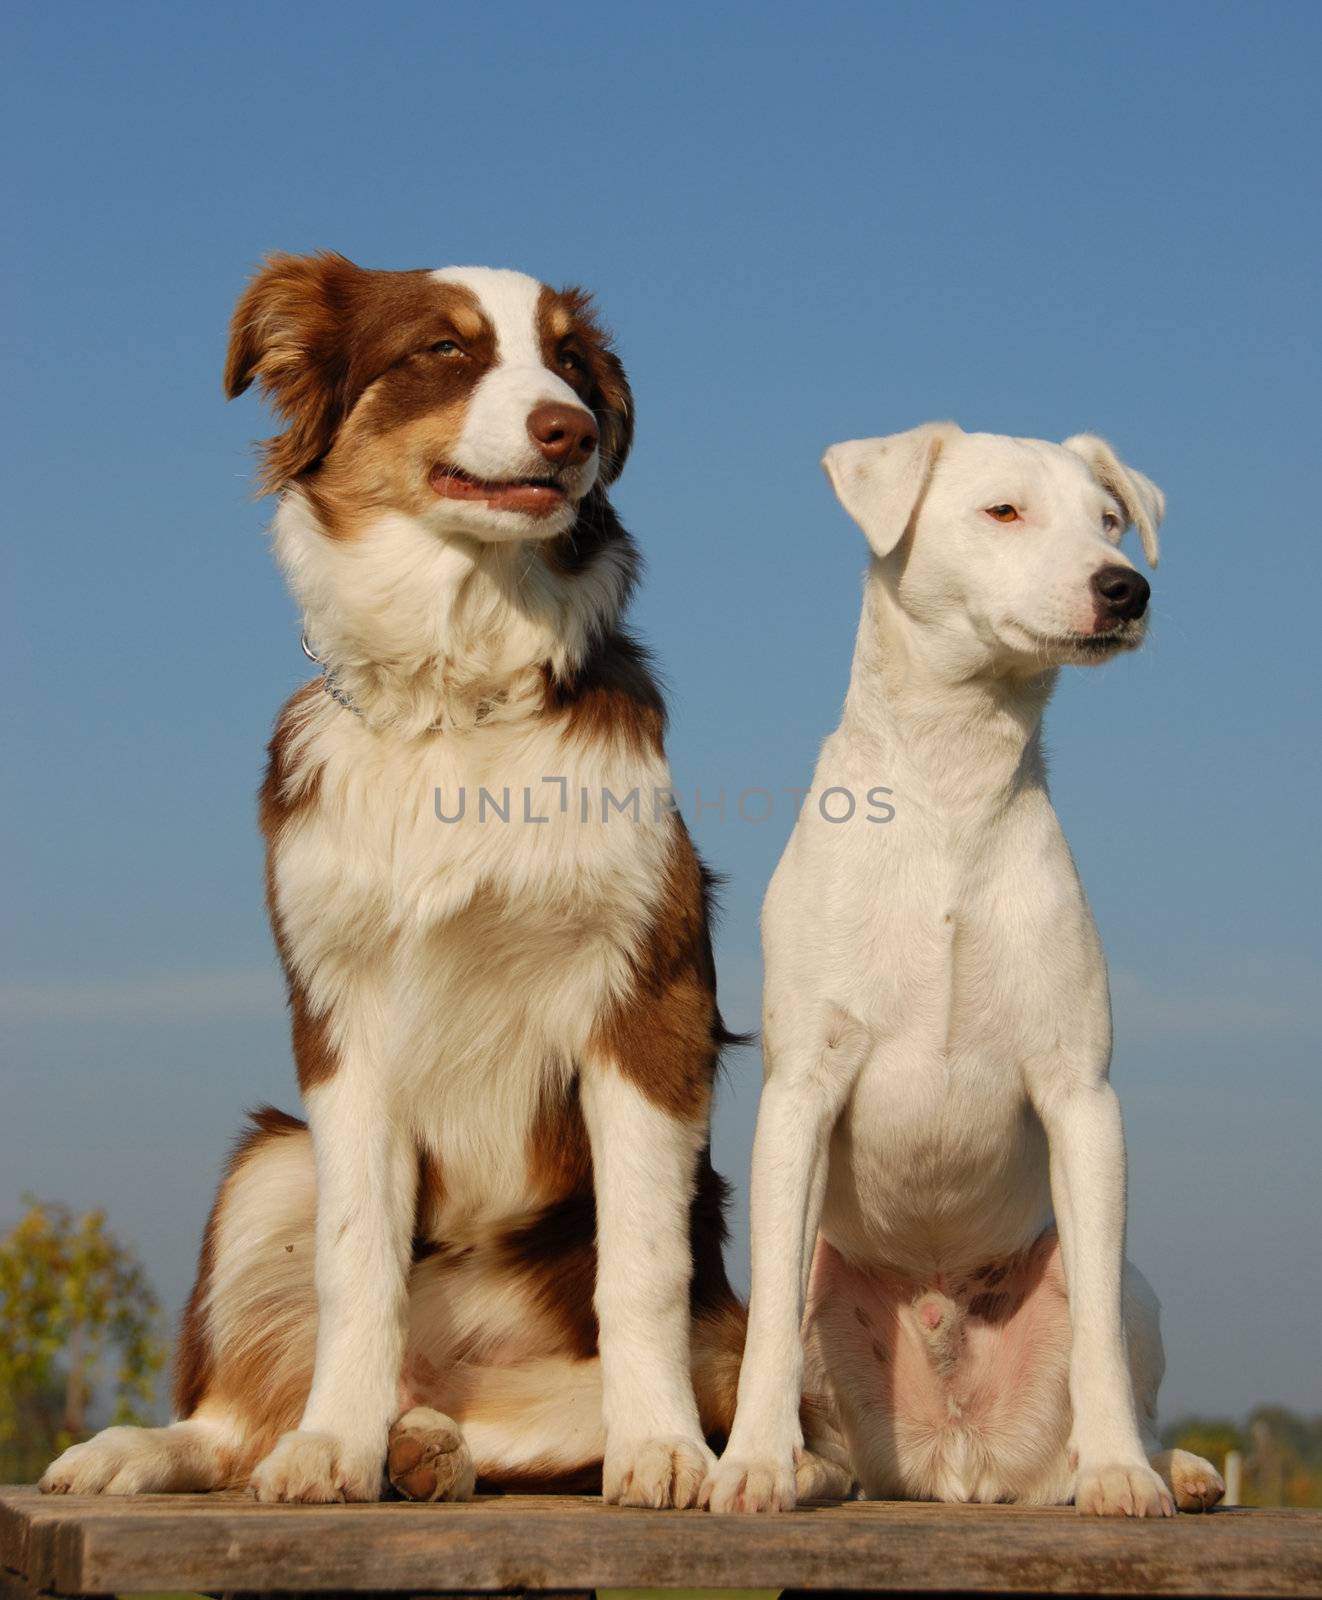 portrait of a  purebred jack russel terrier and a puppy australian shepherd

